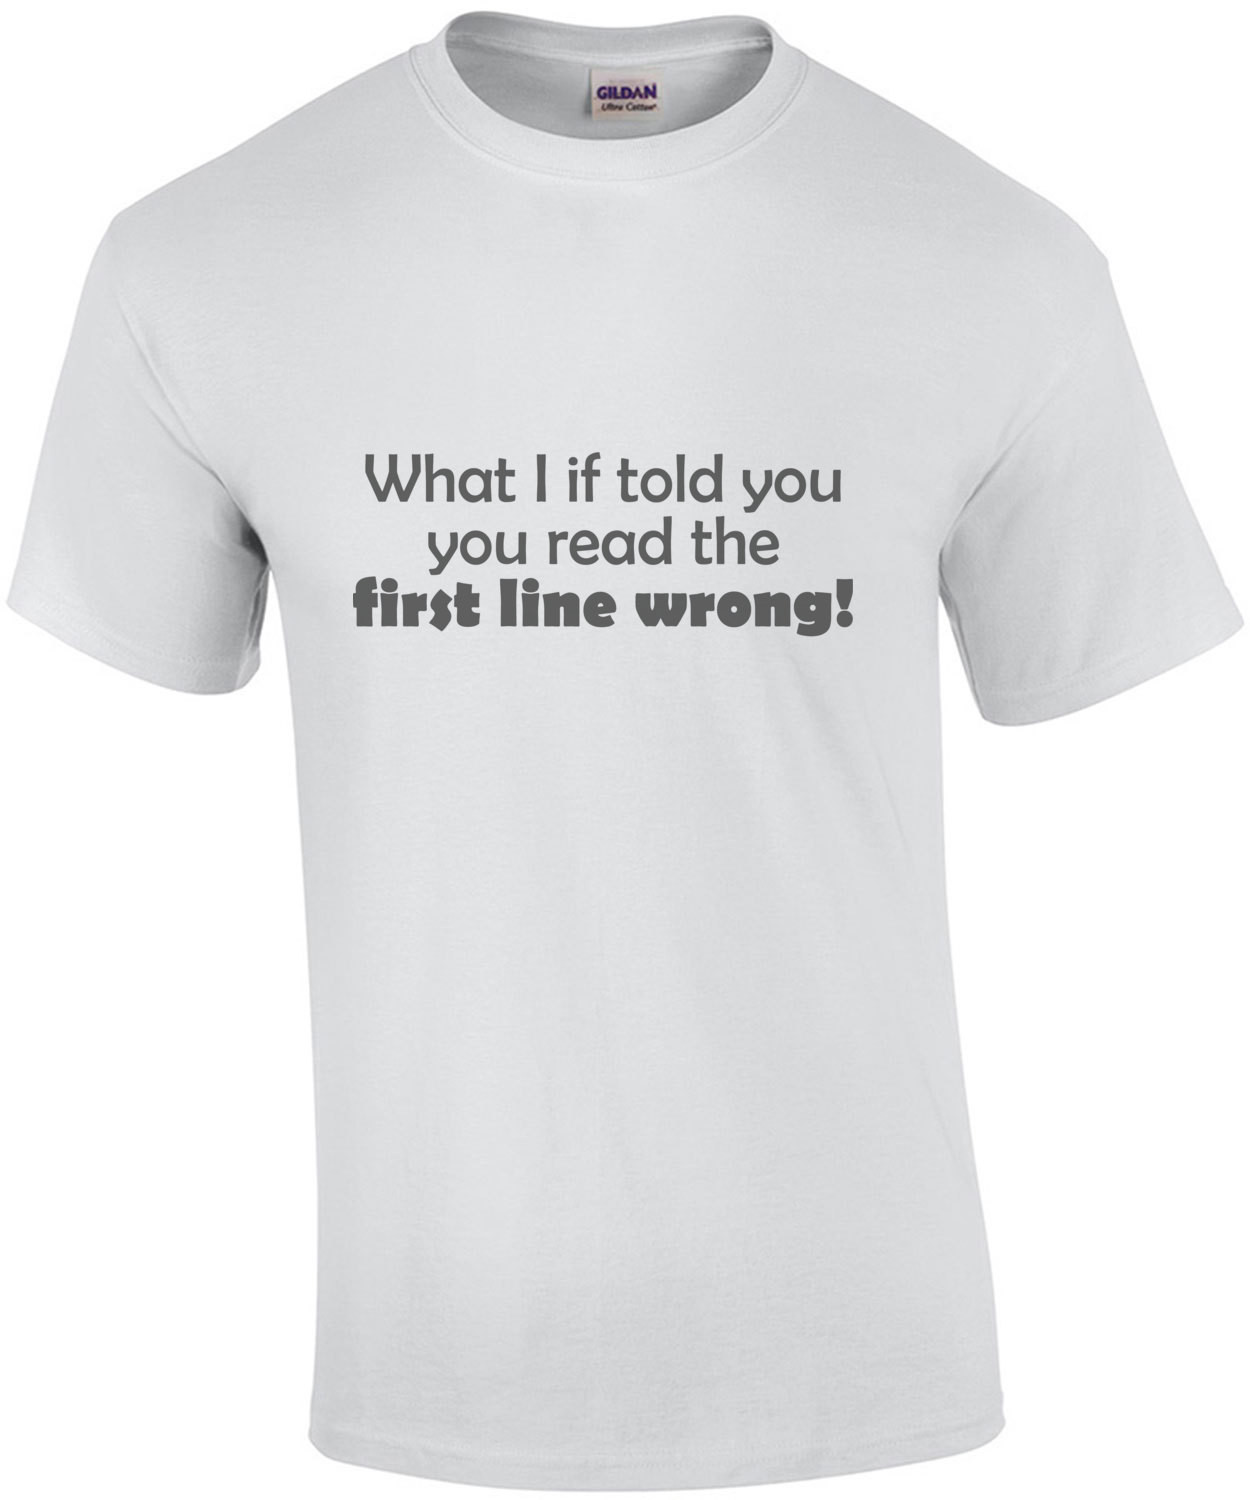 What I if I told you you read the first line wrong! clever t-shirt